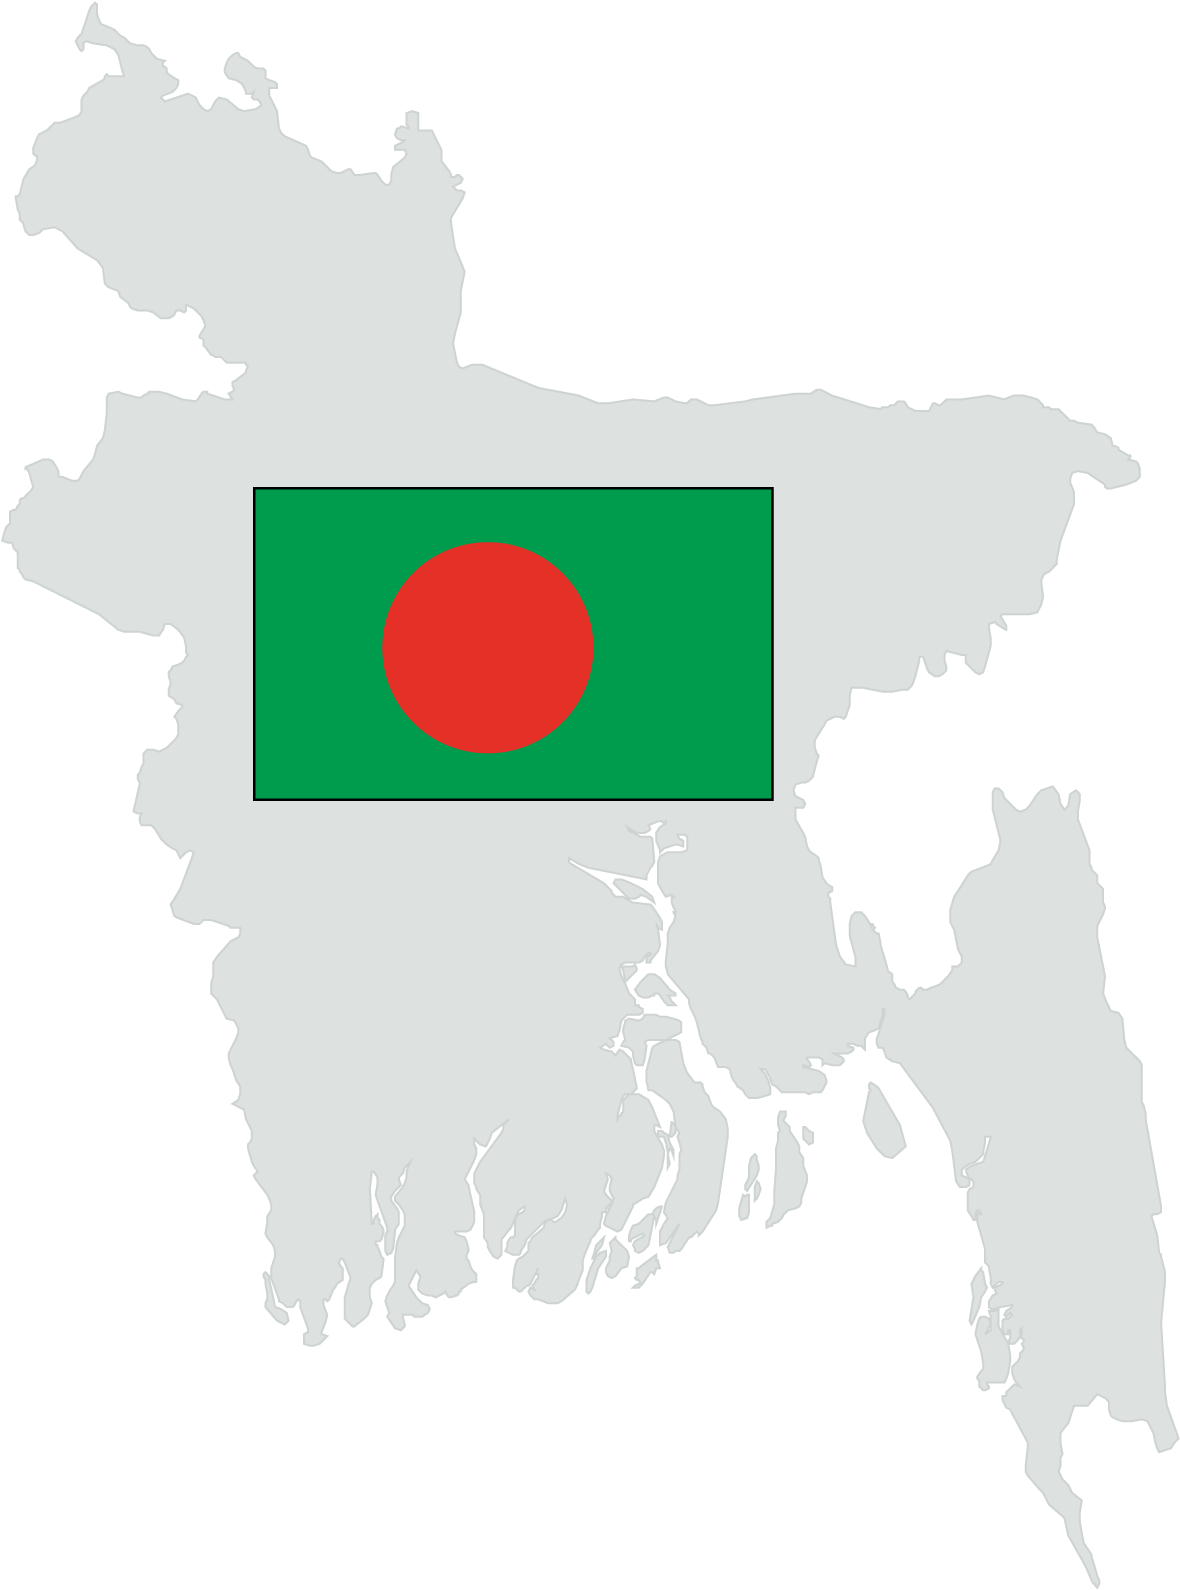 A Map Of Bangladesh With A Flag